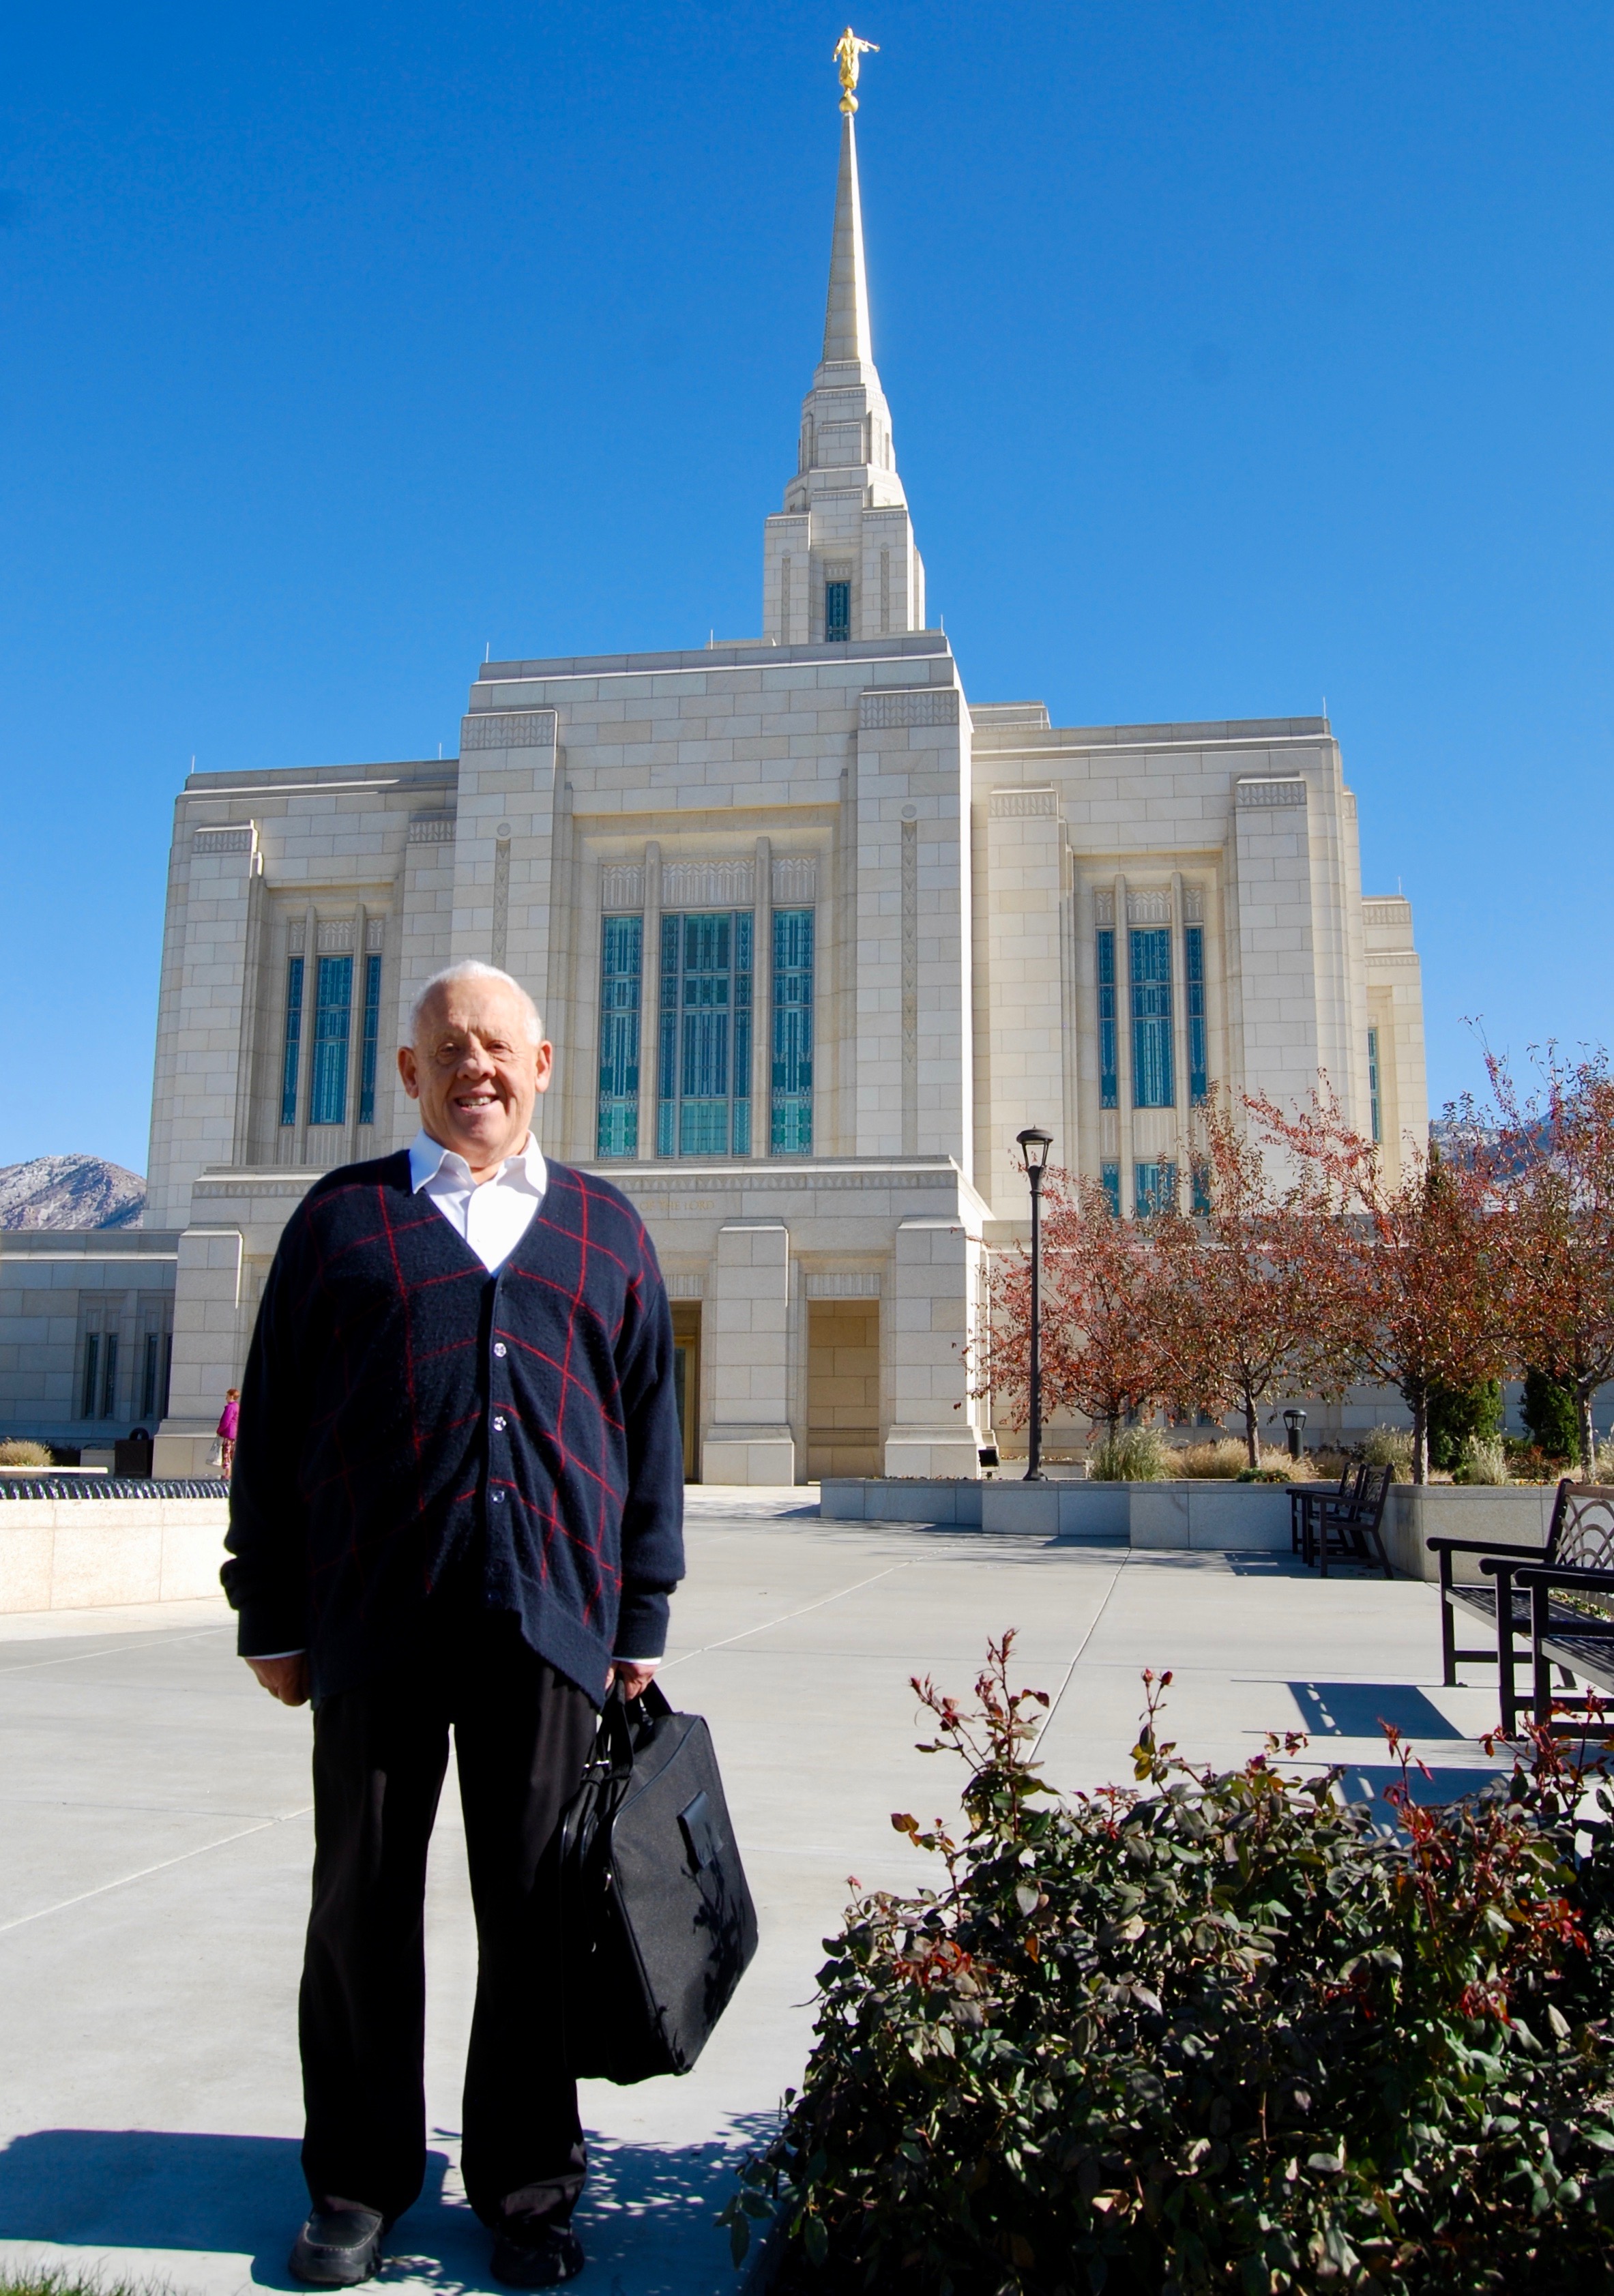 Dennis Preece stands outside the Ogden Utah Temple after attending his daily two endowment sessions on Wednesday, Oct. 30, 2019.